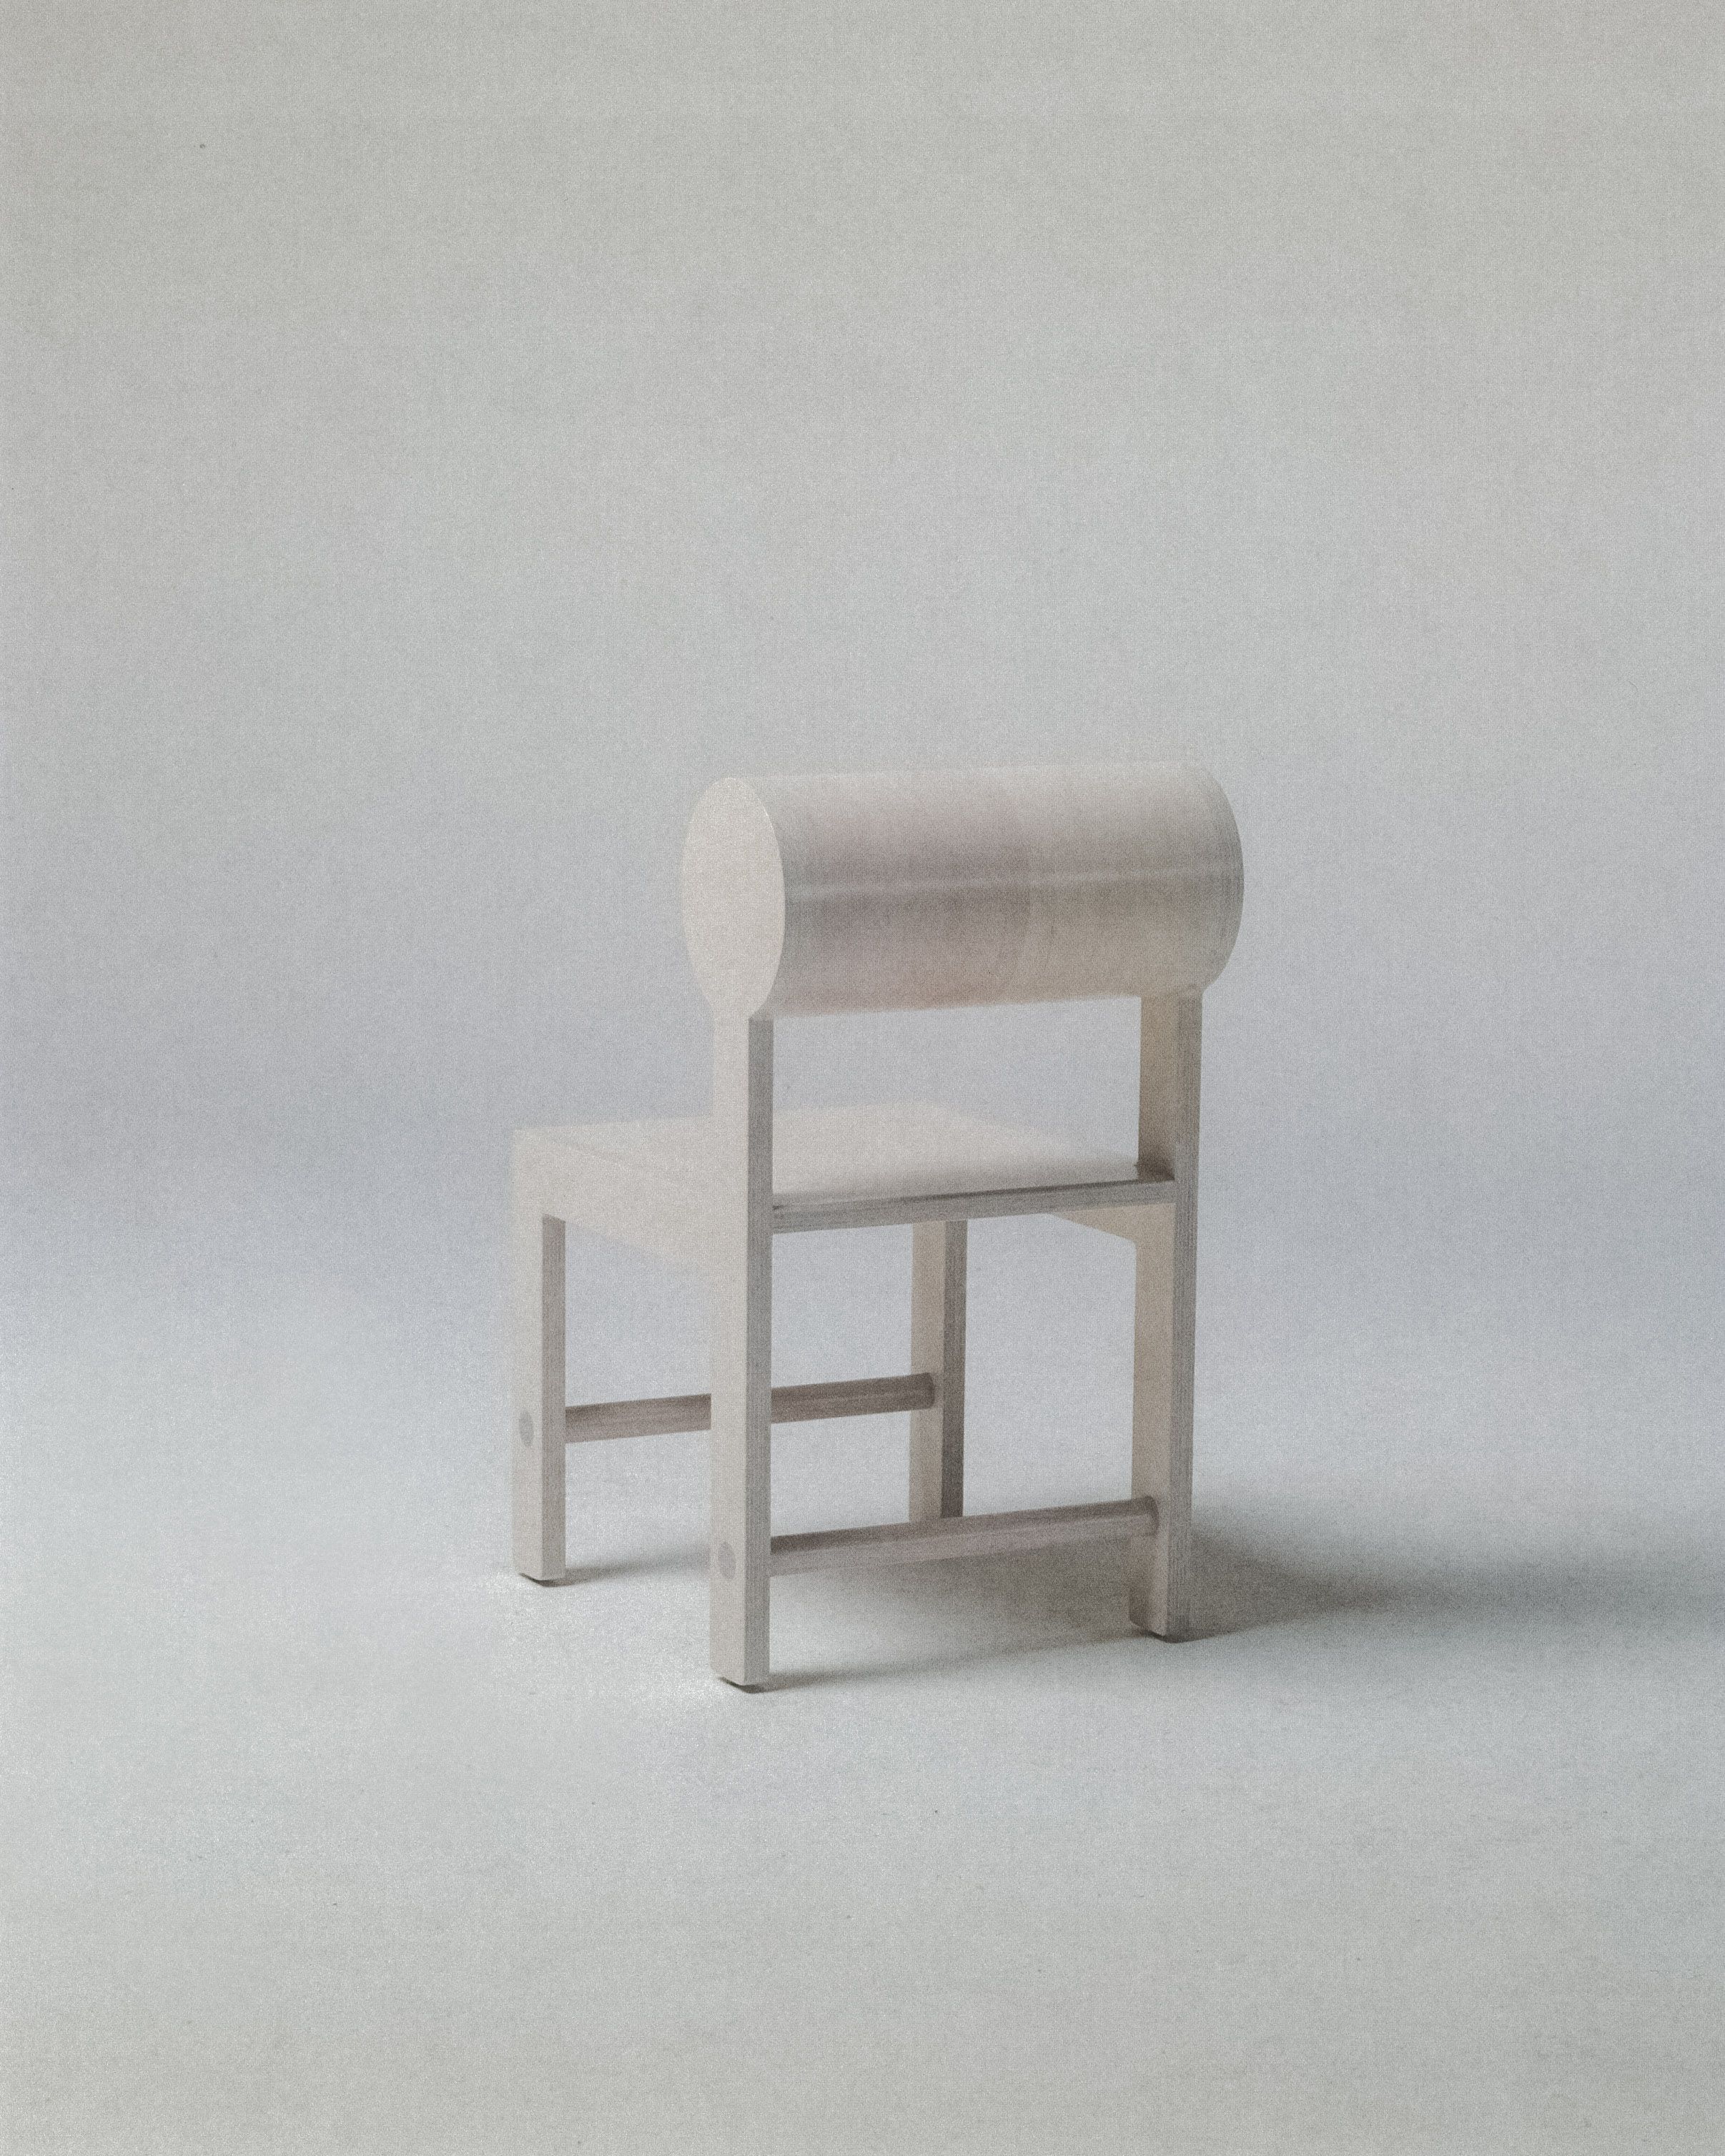  Mini Cylinder Chair product image 1